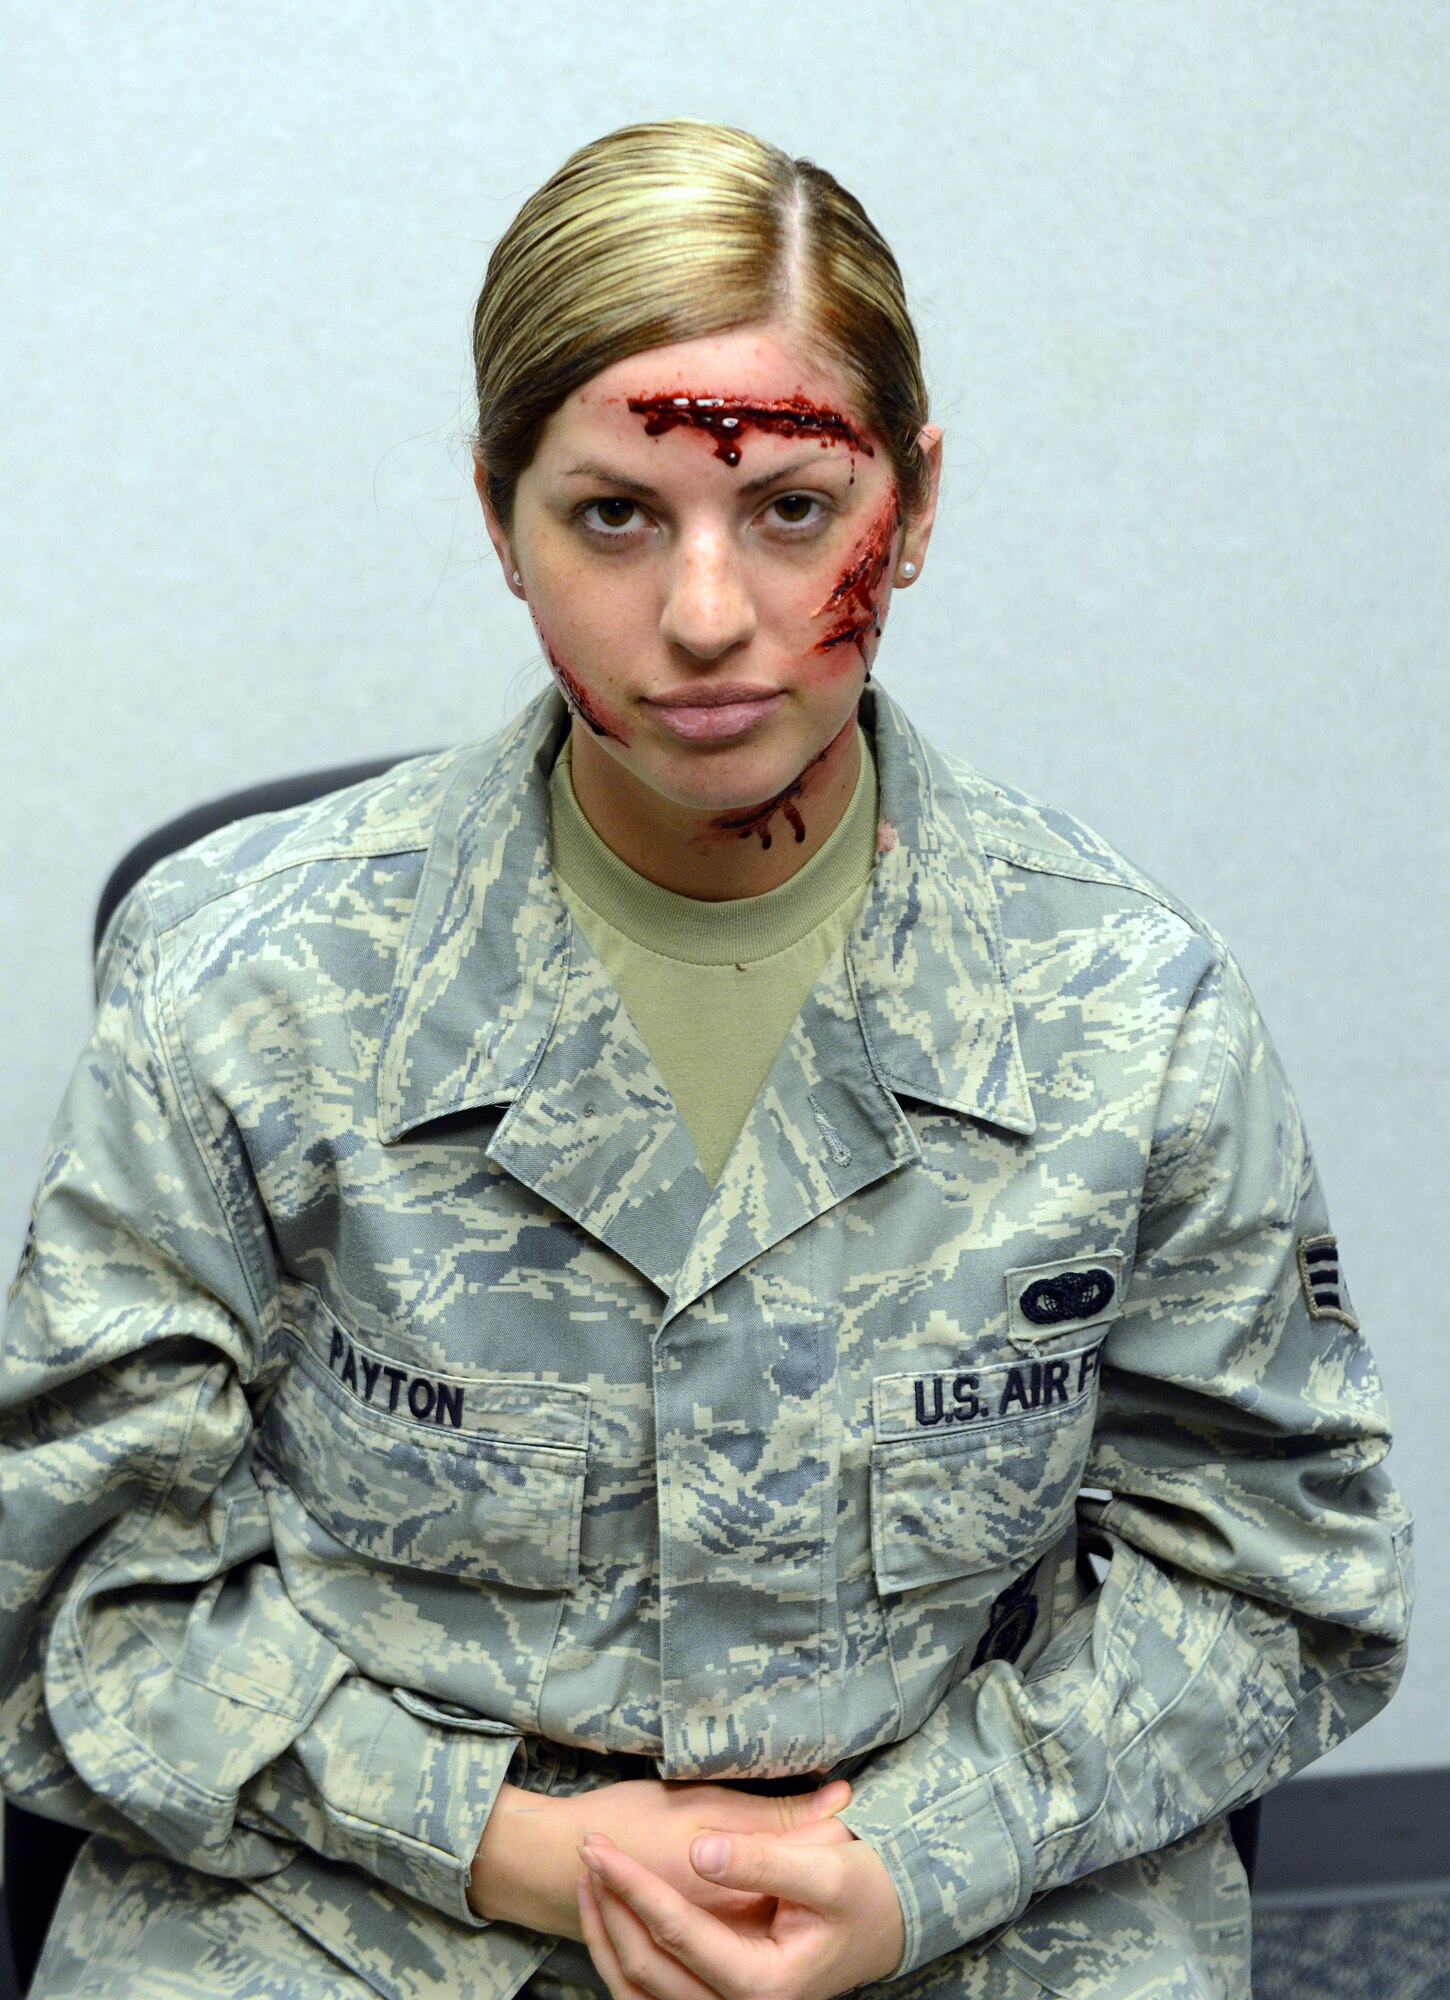 Senior Airman Shawnee Ryan, 78th Medical Support Squadron laboratory technician, shows off her moulage makeover. The name on her uniform is different because it's used for exercises. (U.S. Air Force photo by Tommie Horton)